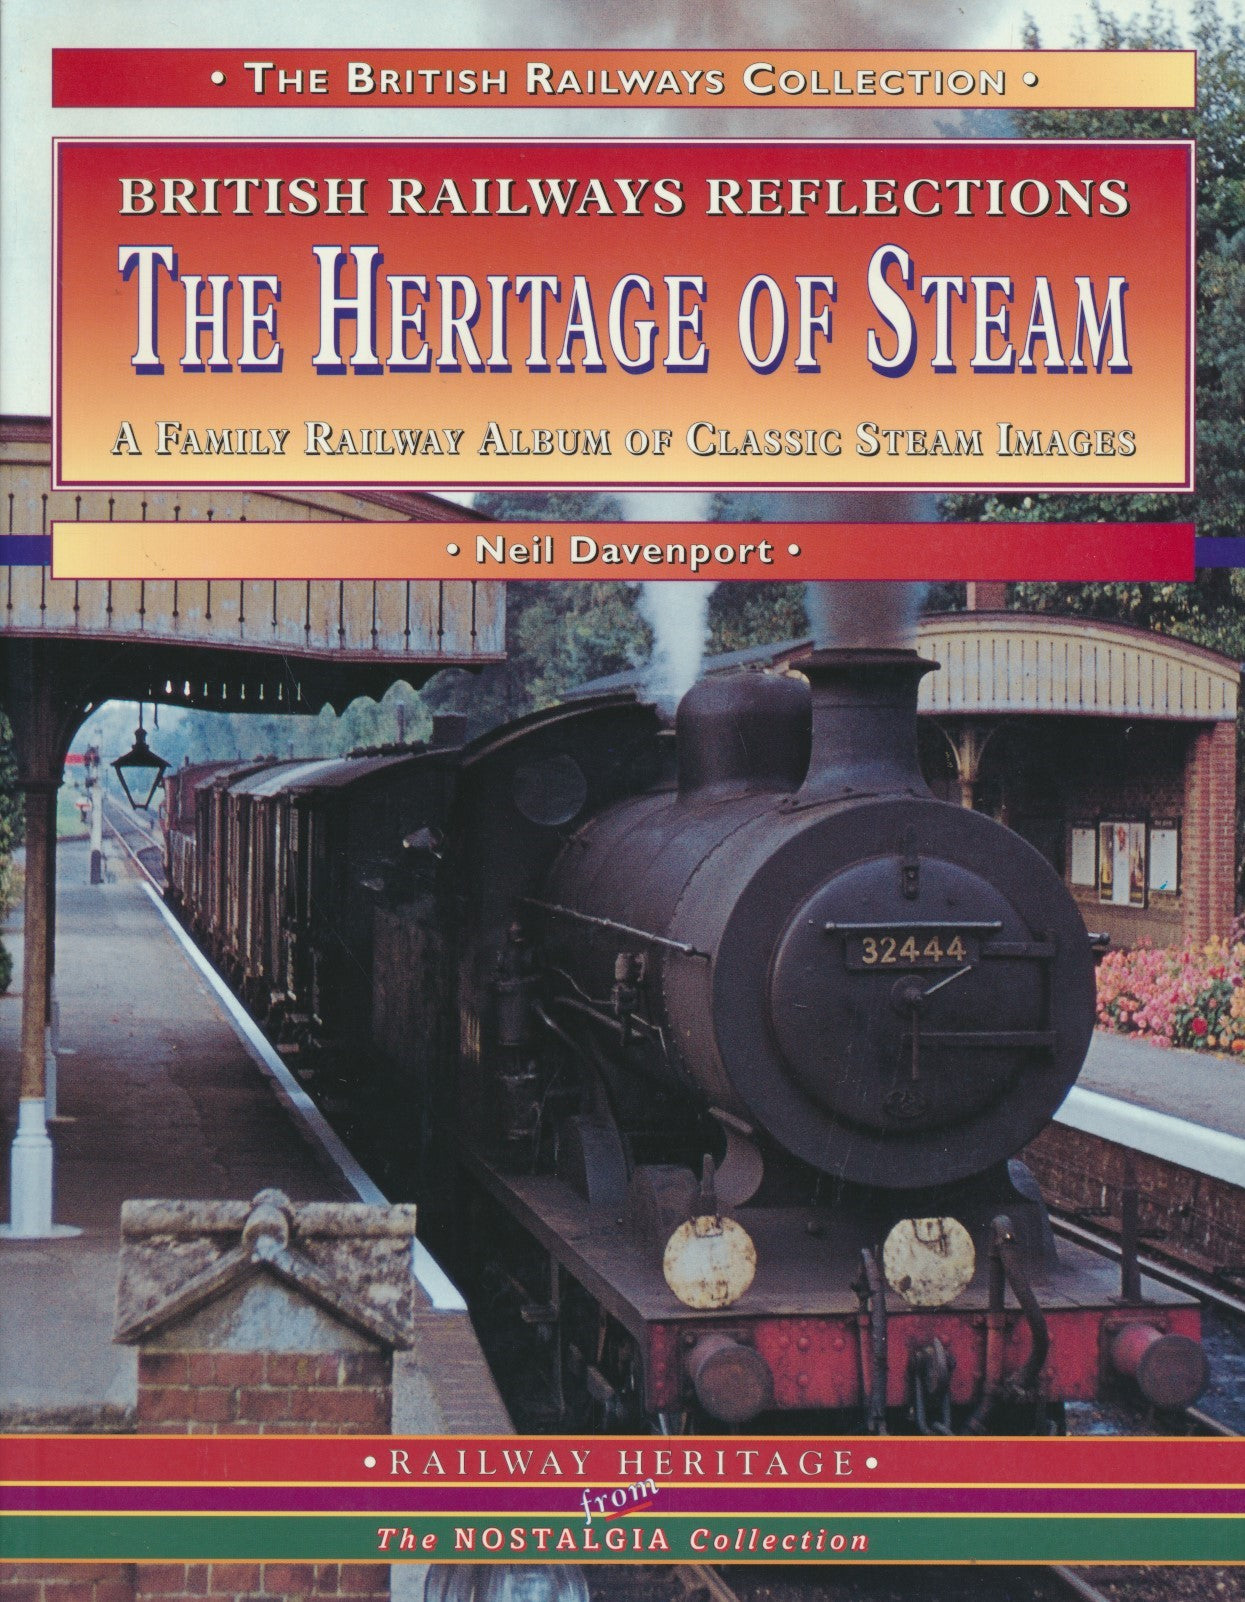 The Heritage of Steam: A Family Railway Album of Classic Steam Images